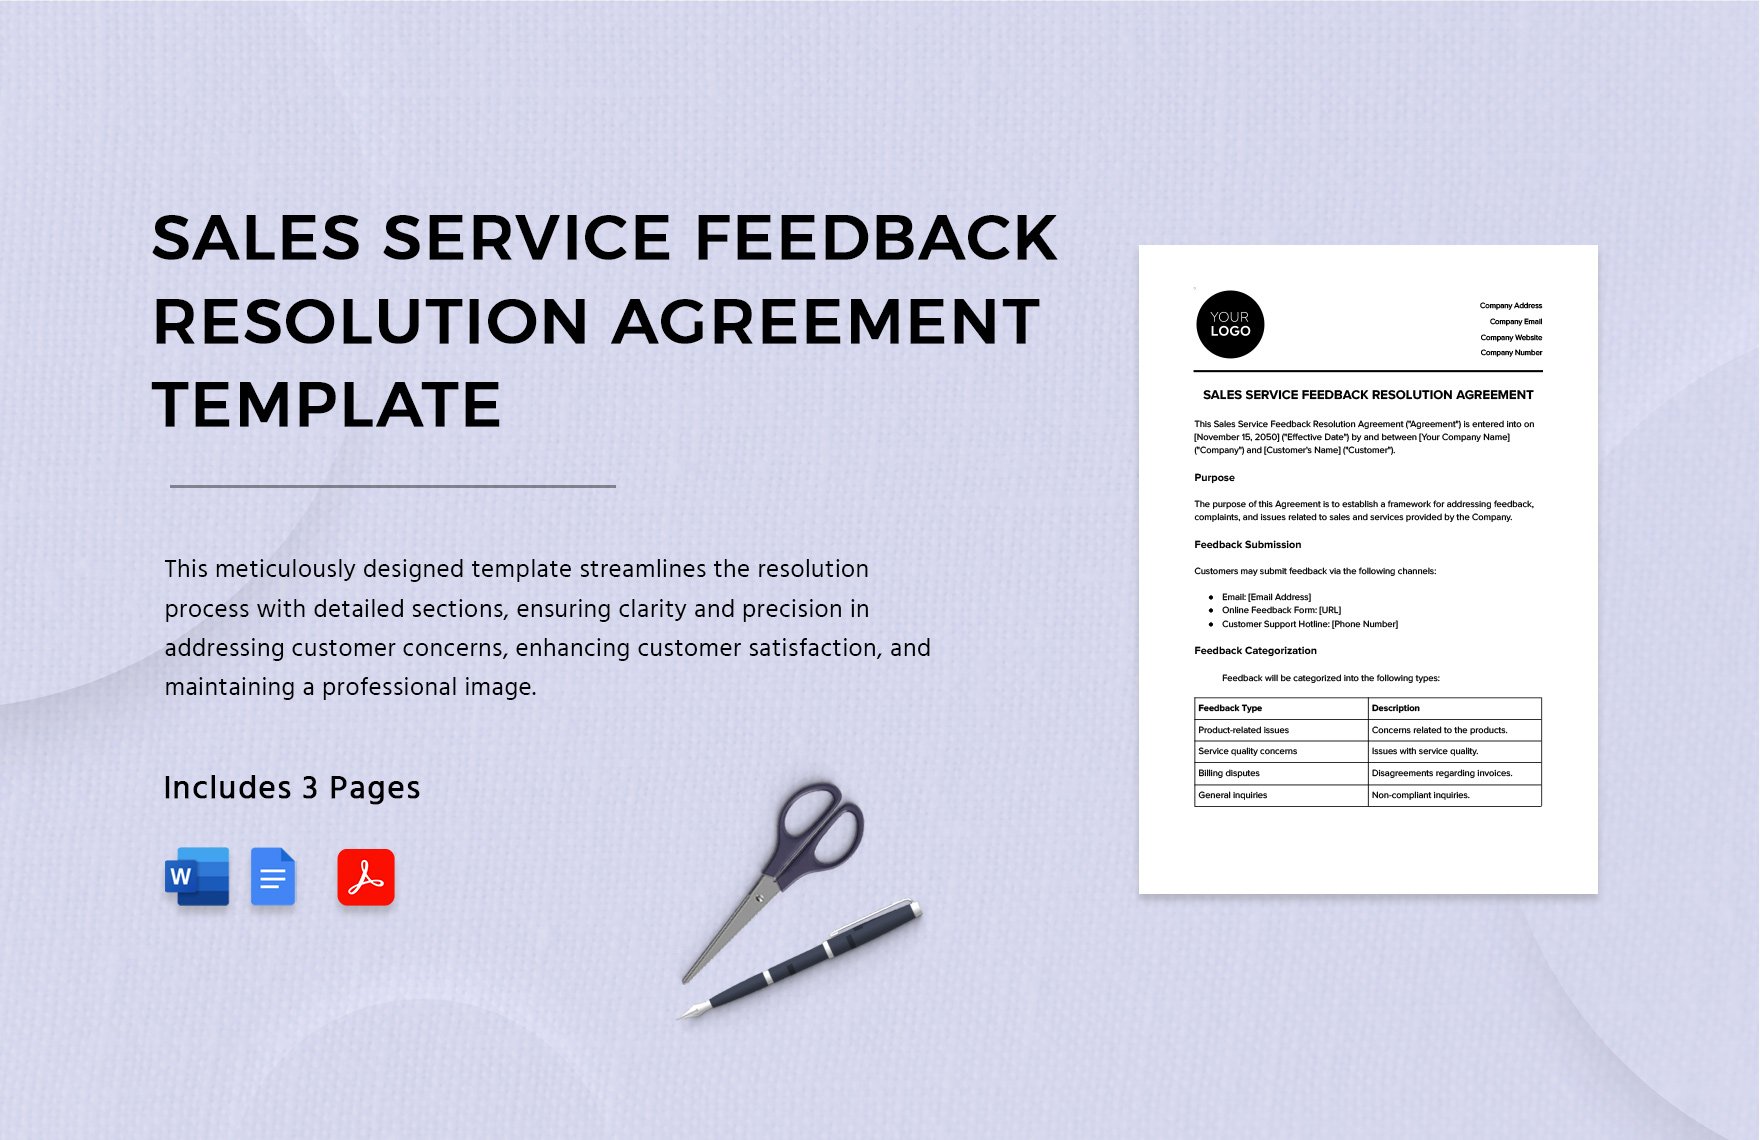 Sales Service Feedback Resolution Agreement Template